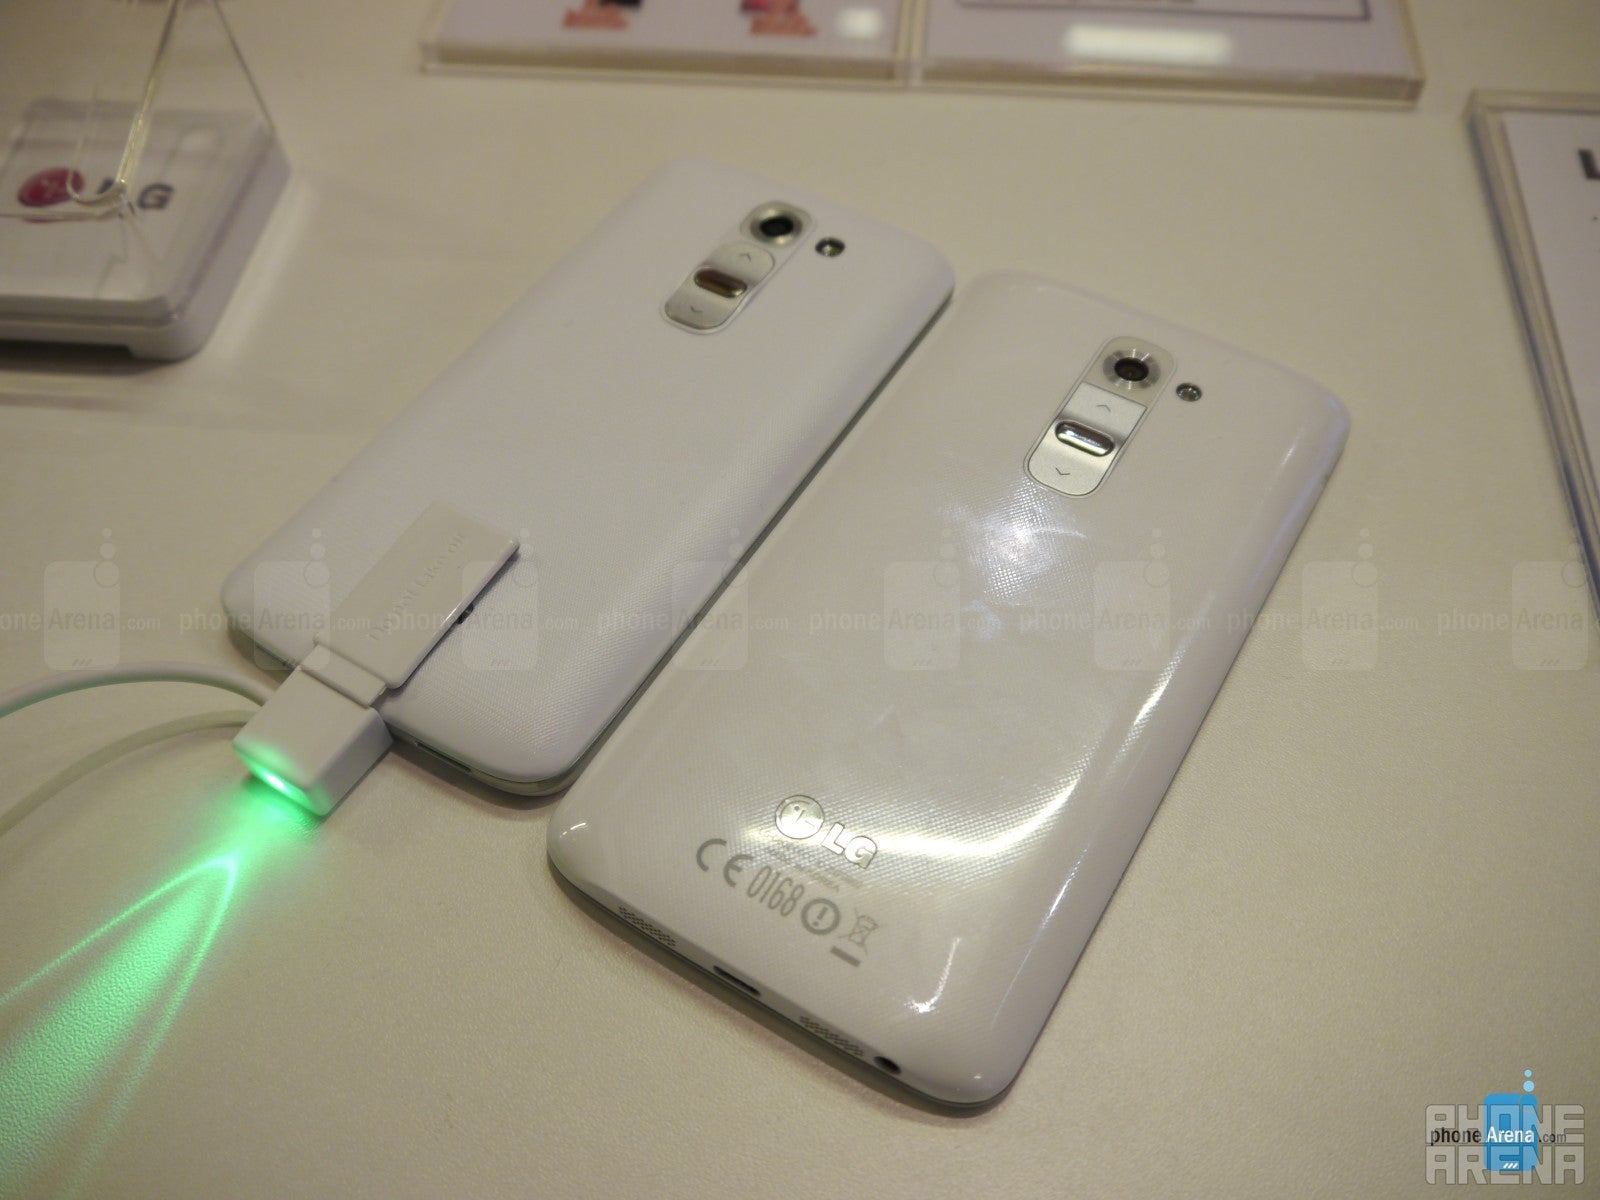 The LG G2 mini will feature either 13 or 8-megapixel camera, depending on market - LG G2 mini vs LG G2: first look